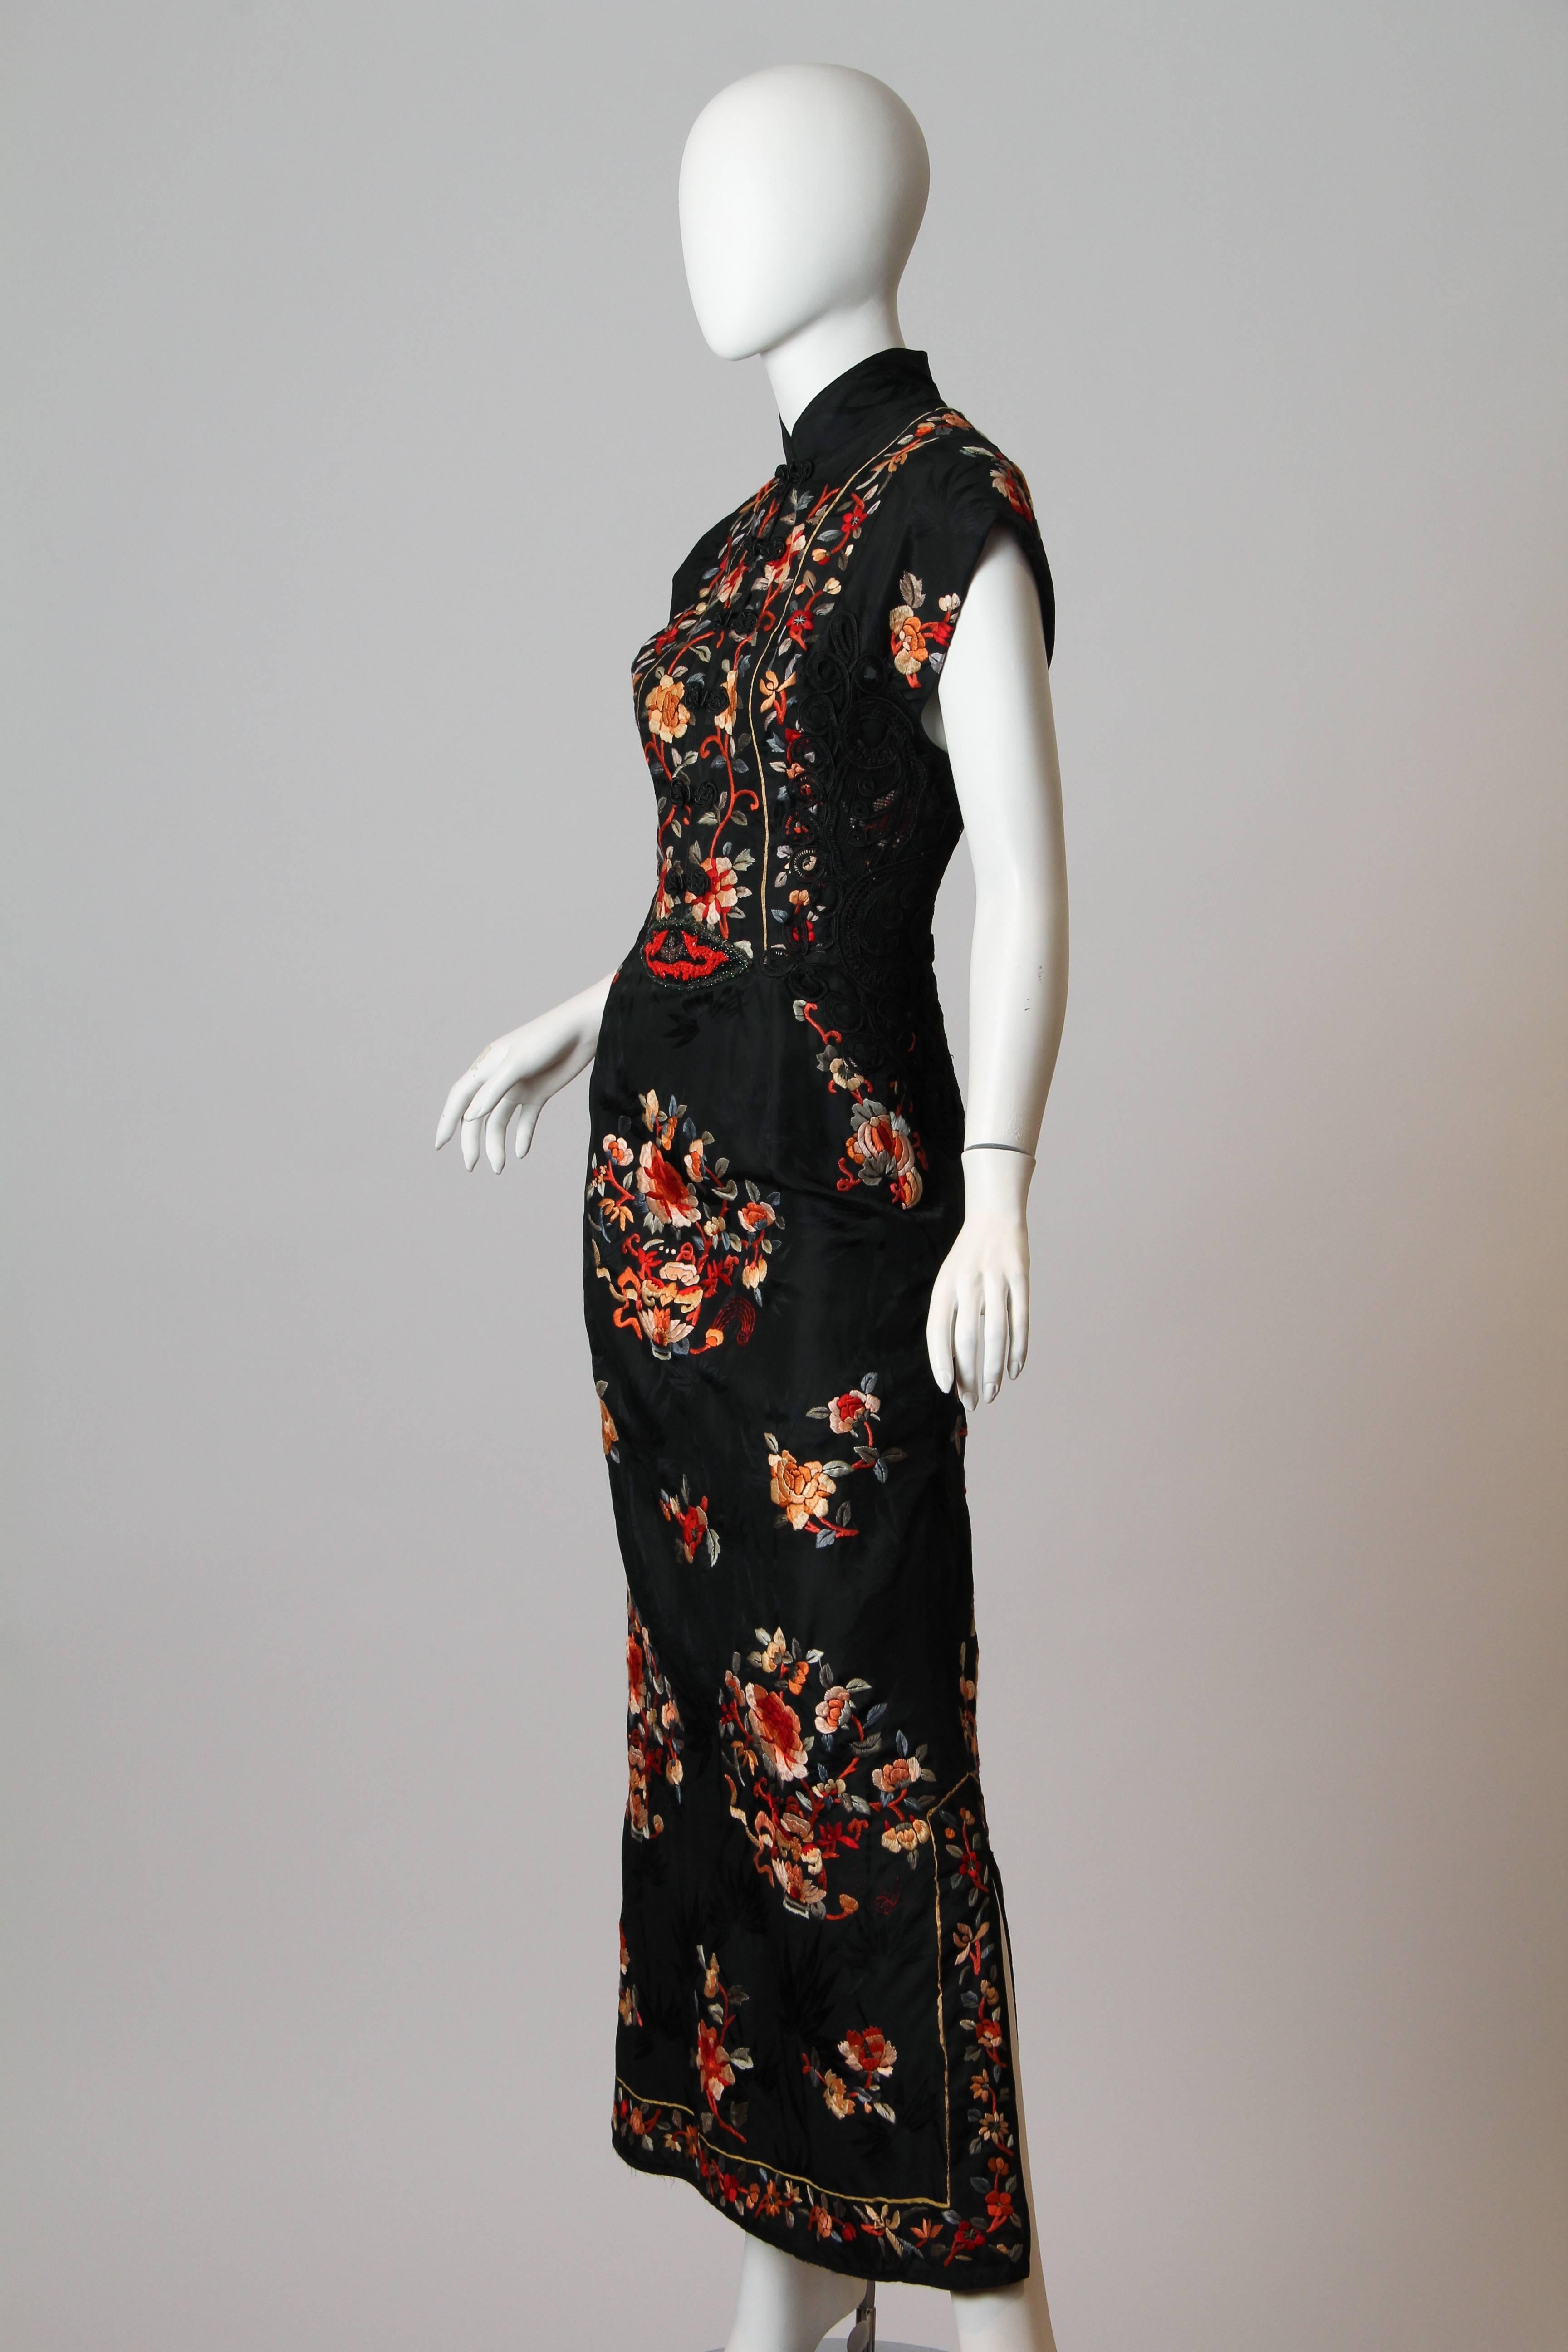 Women's Backless Hand Embroidered Chinese Dress with Victorian Lace